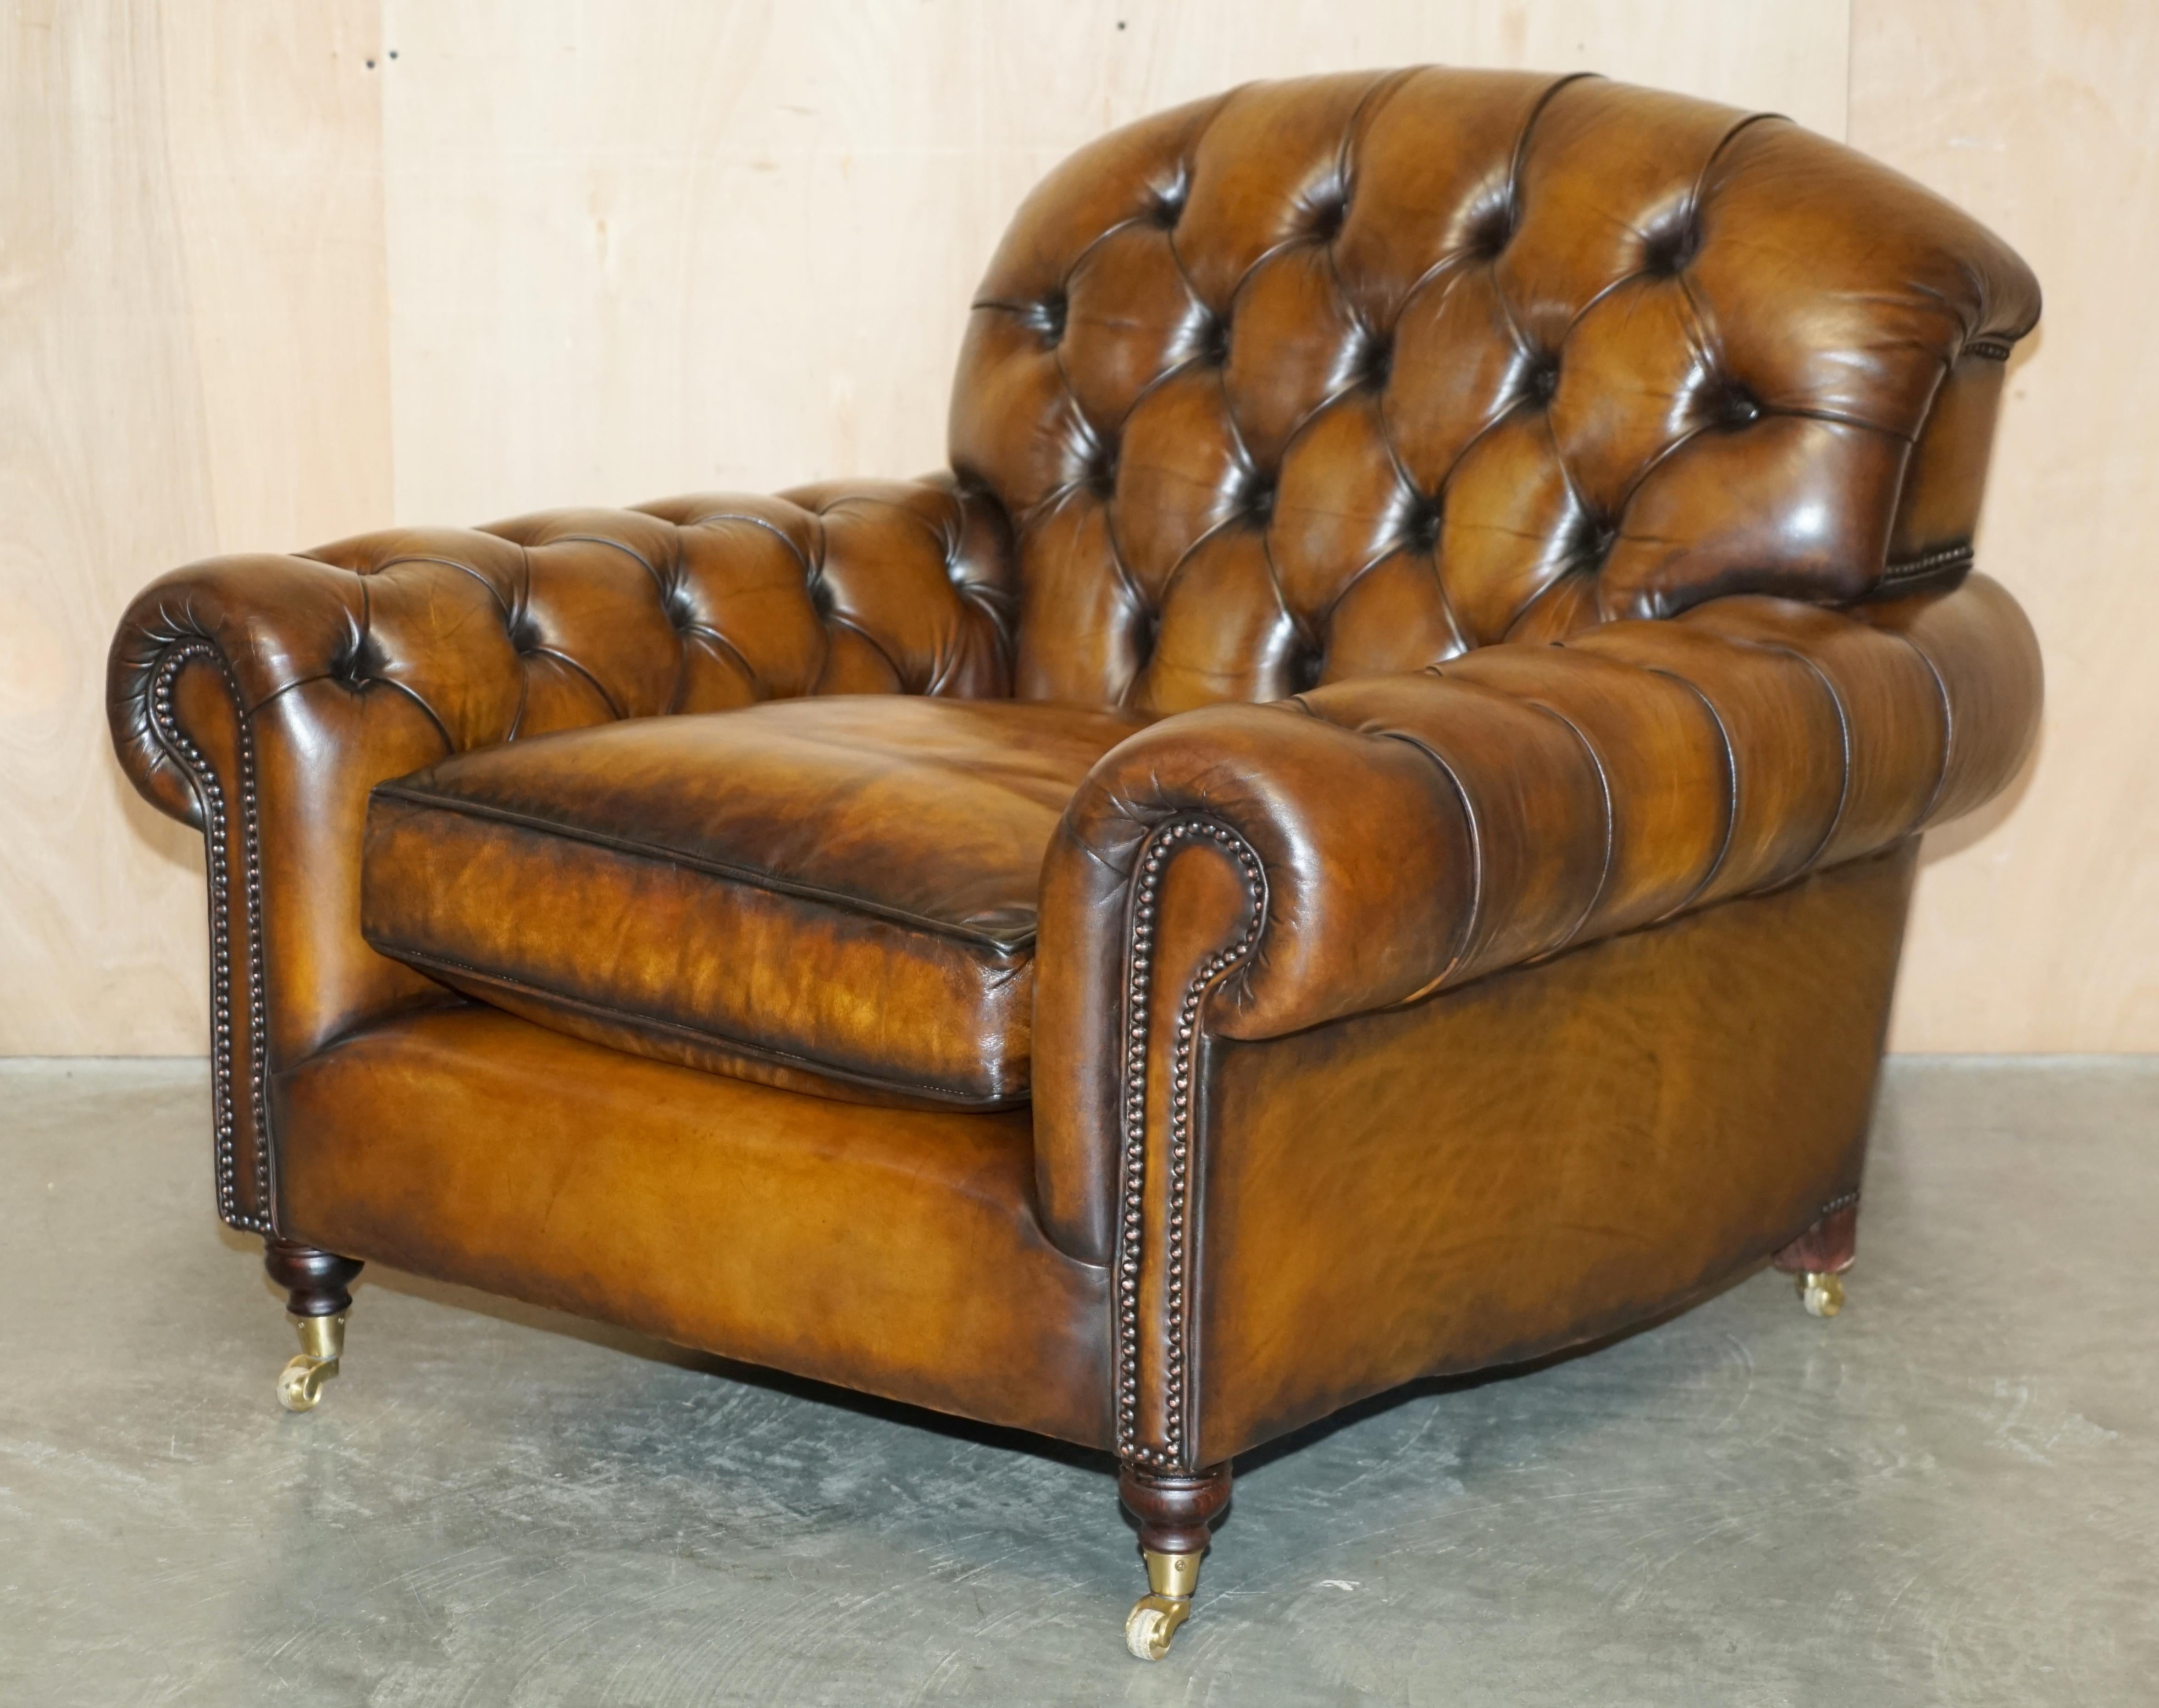 Chesterfield PAIR OF FULLY RESTORED GEORGE SMiTH BULGARU BROWN LEATHER CHESTERFIELD ARMCHAIRS For Sale